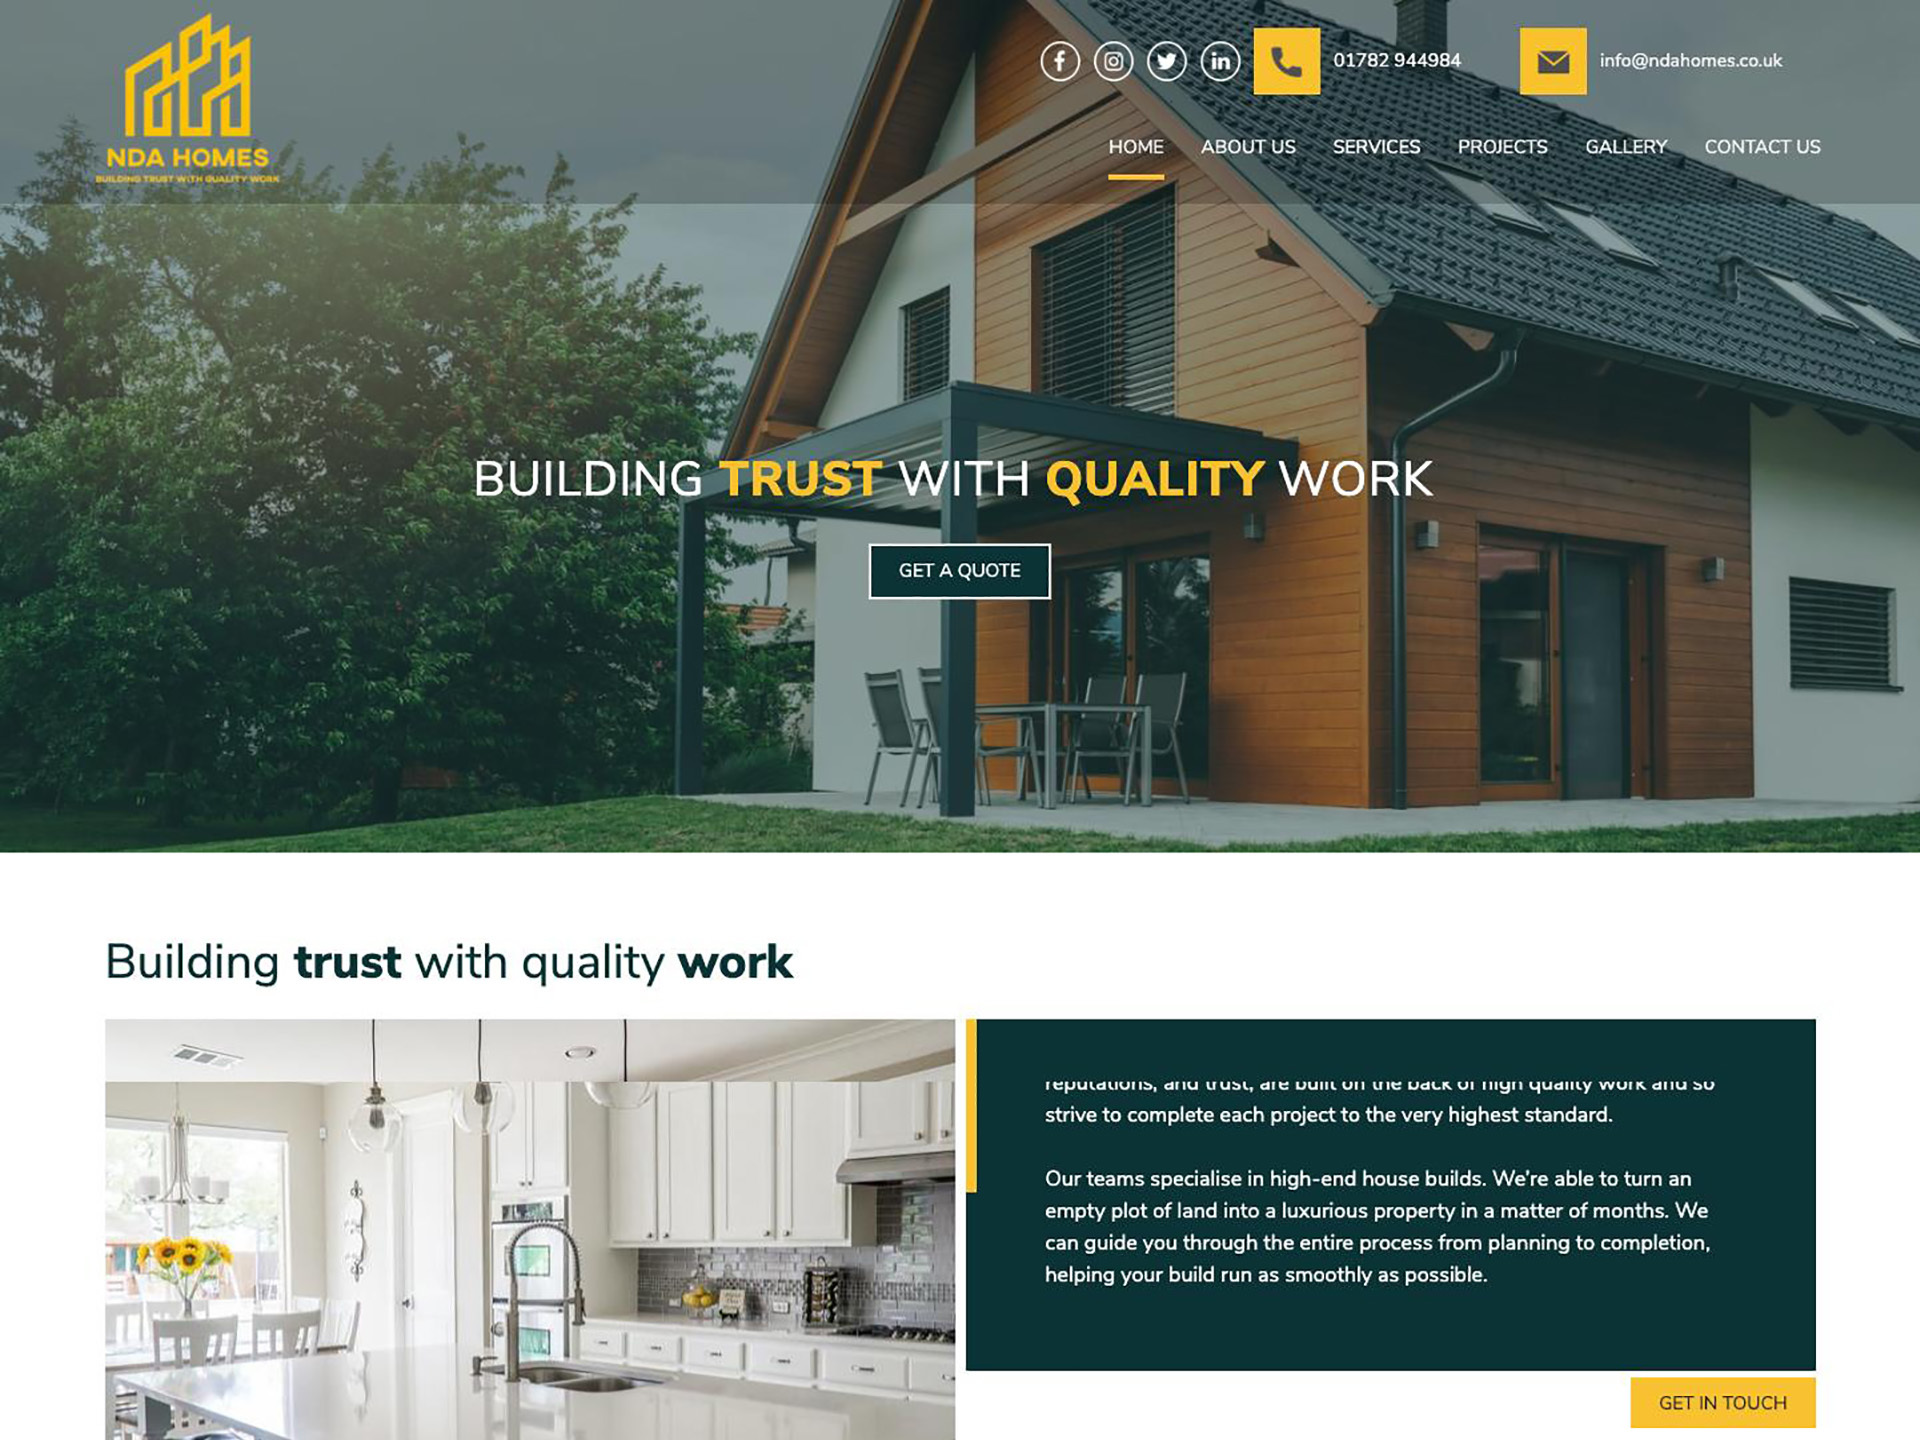 A website in Cheshire for a building company